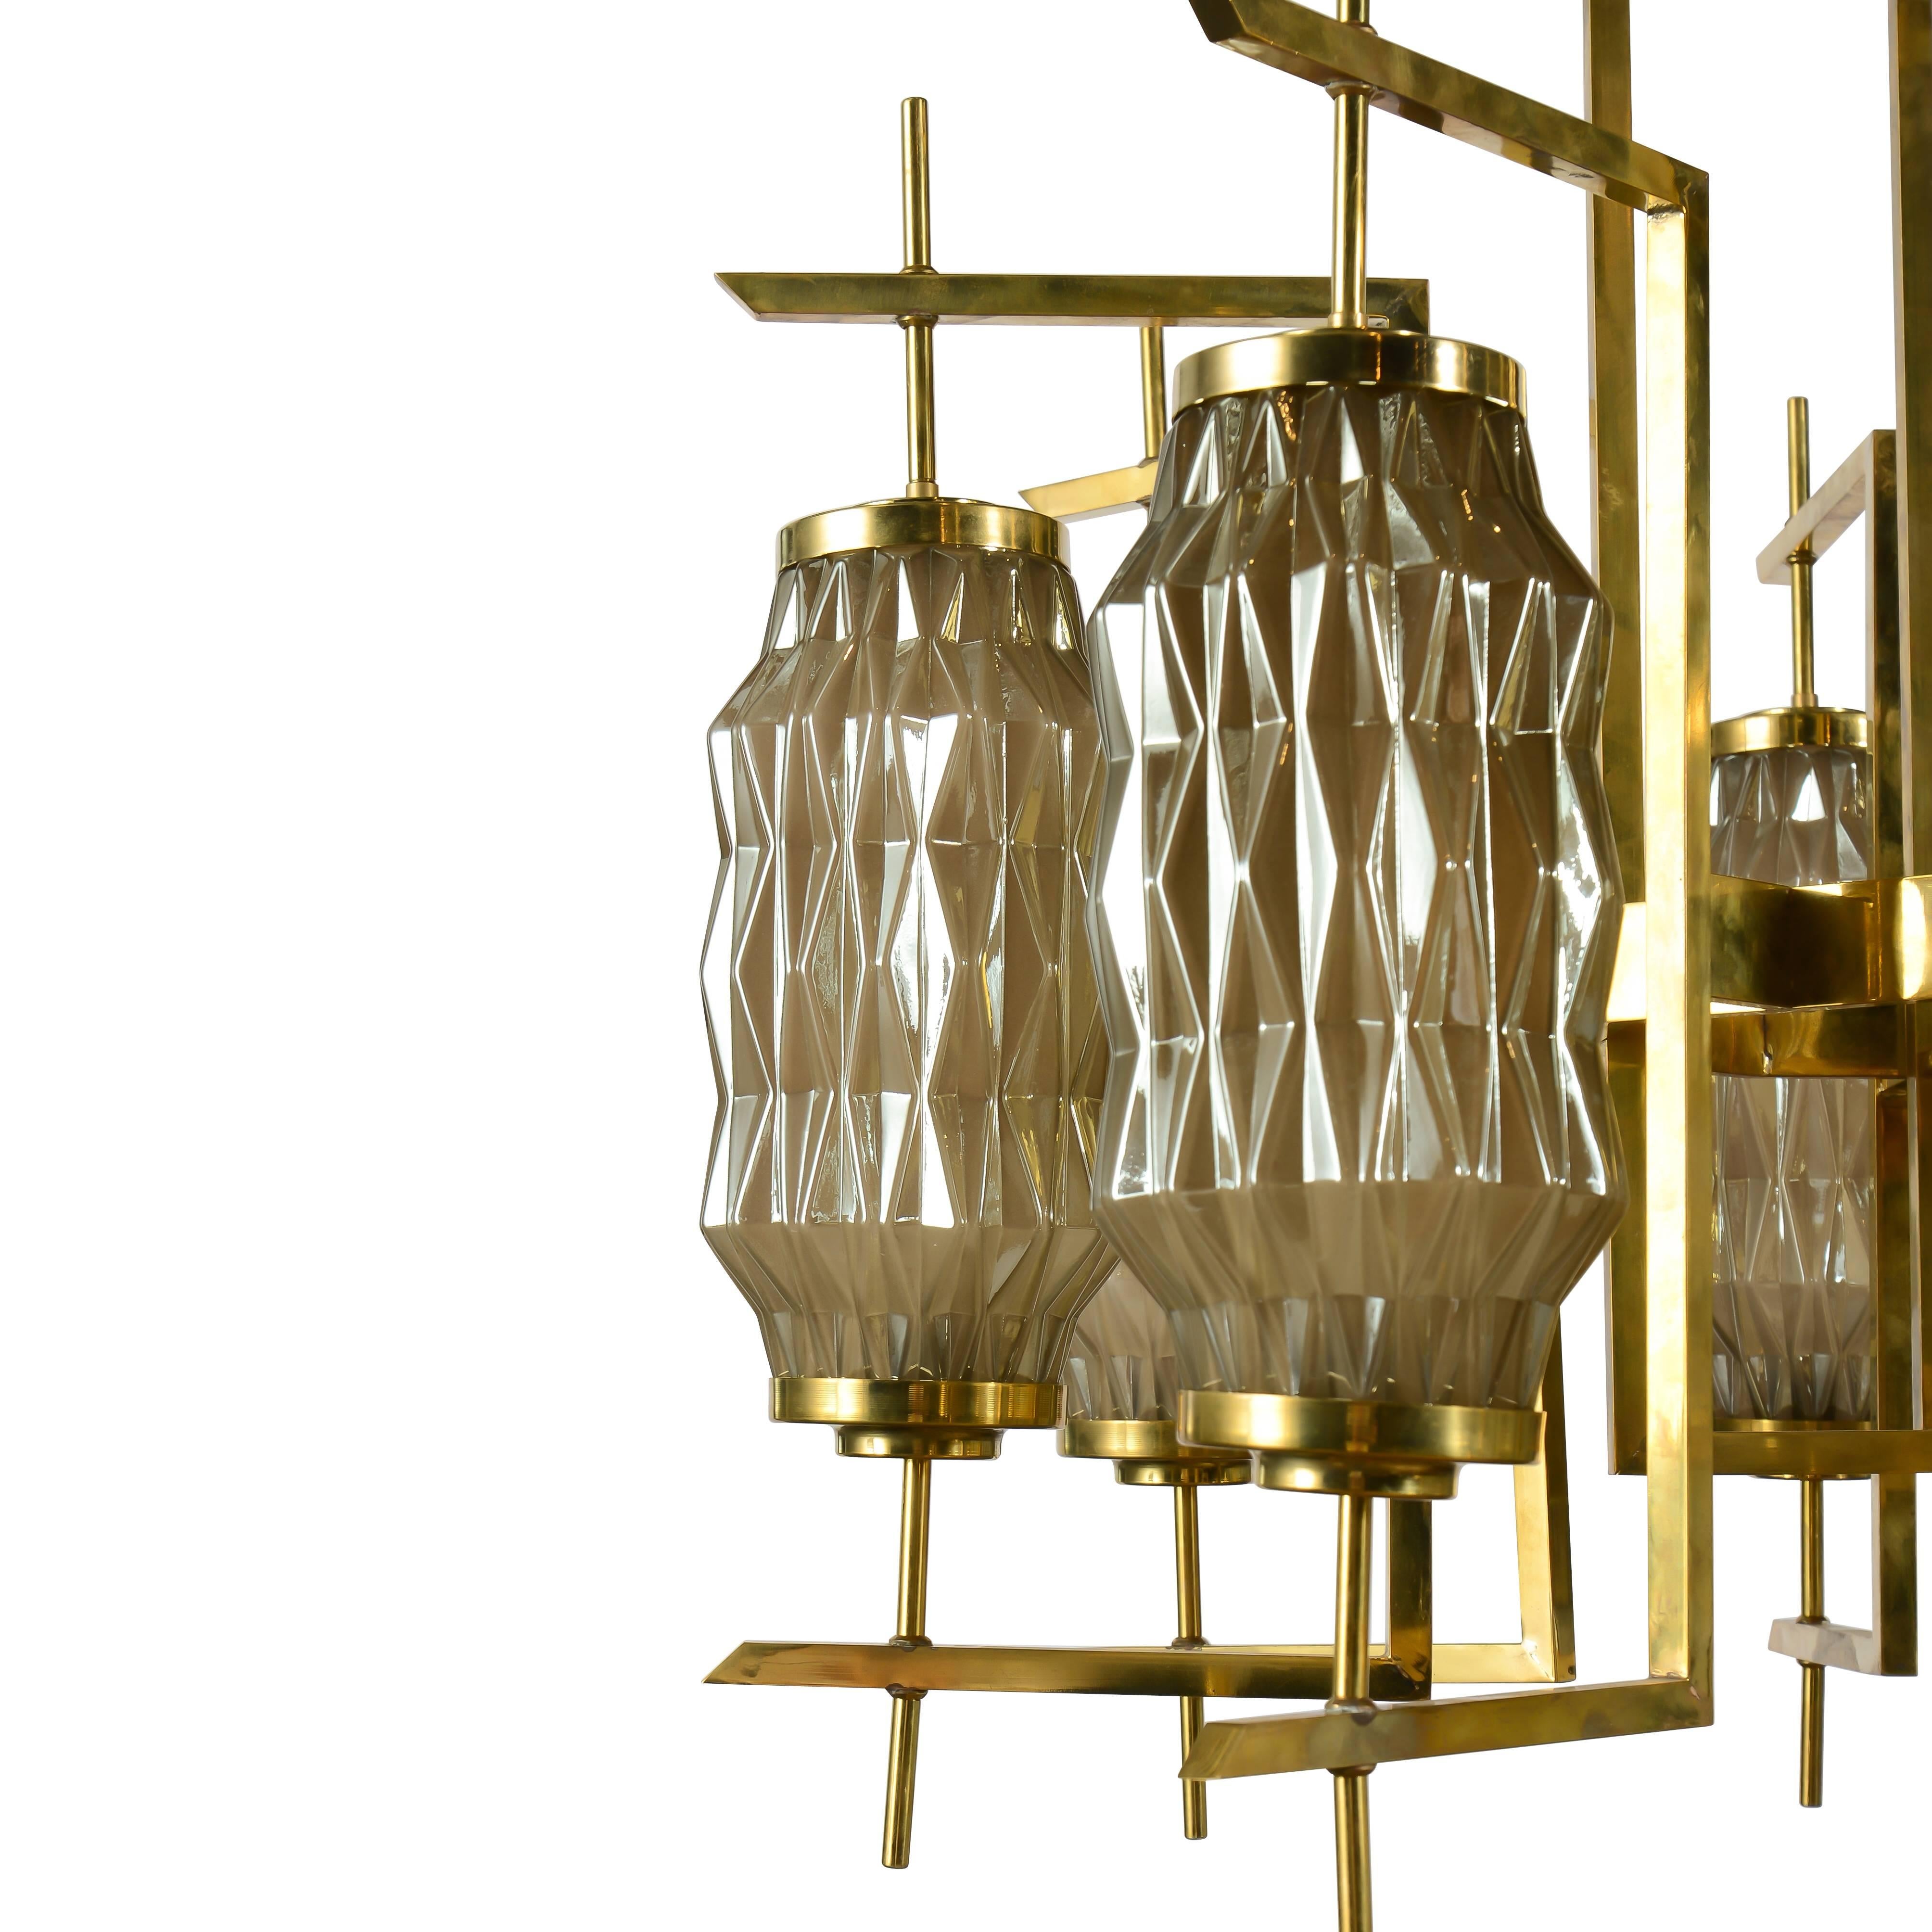 Eight-light brass chandelier with smoked glass diamond geometric shades. Priced individually. Pair available.